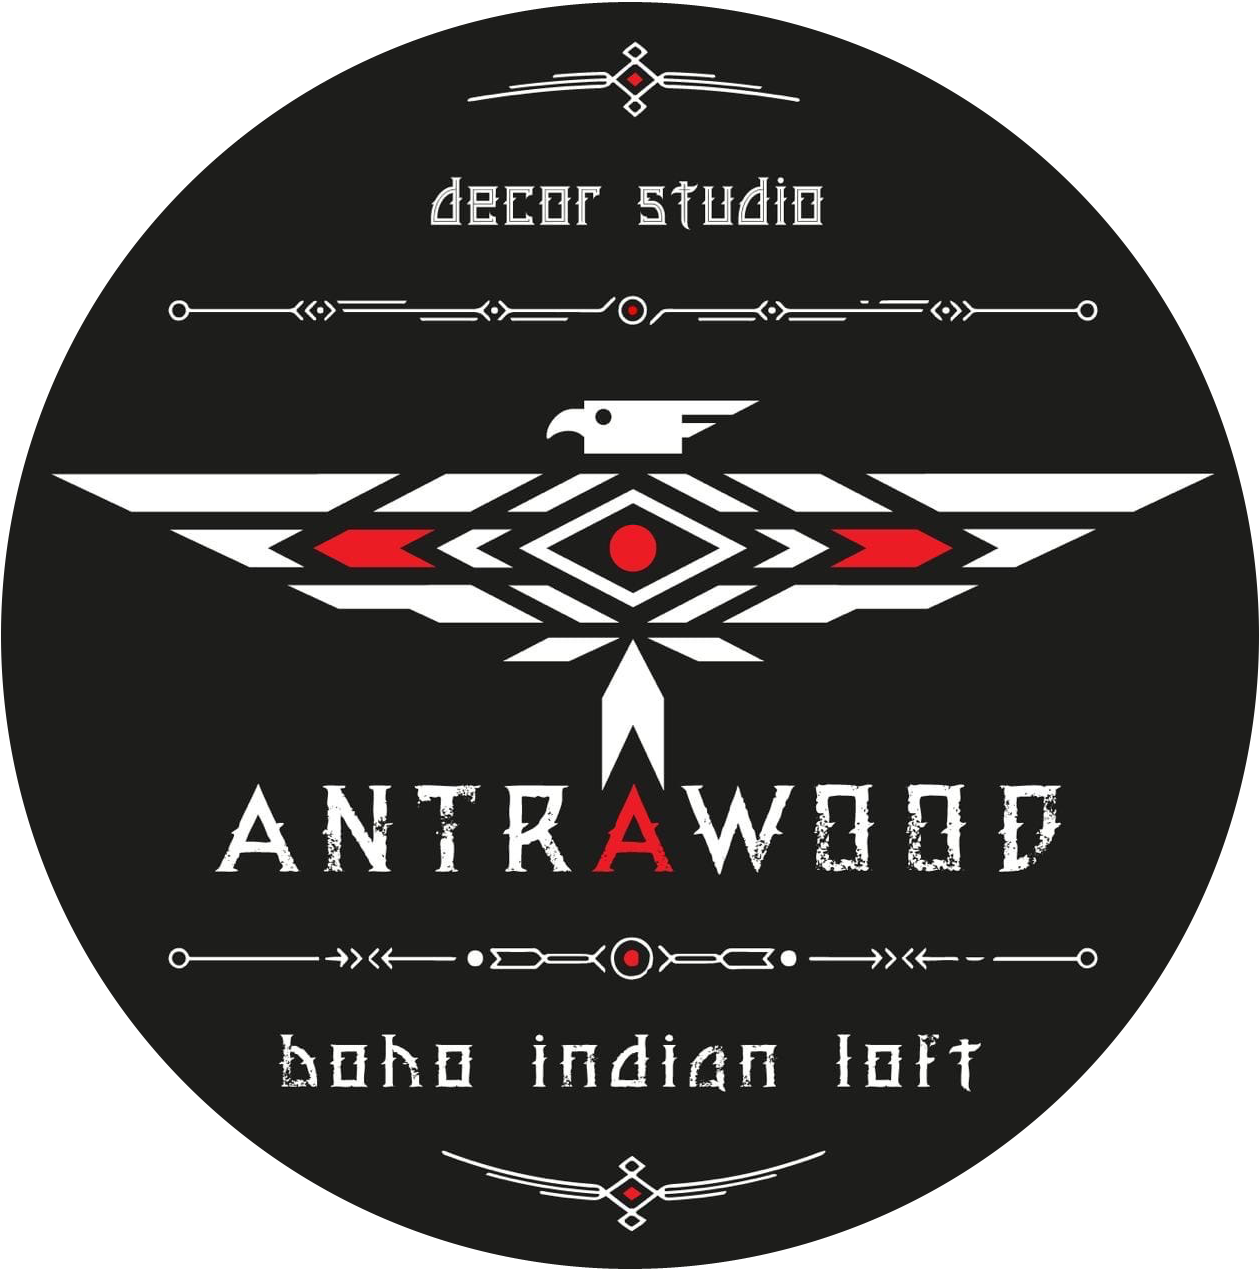 ANTRAWOOD